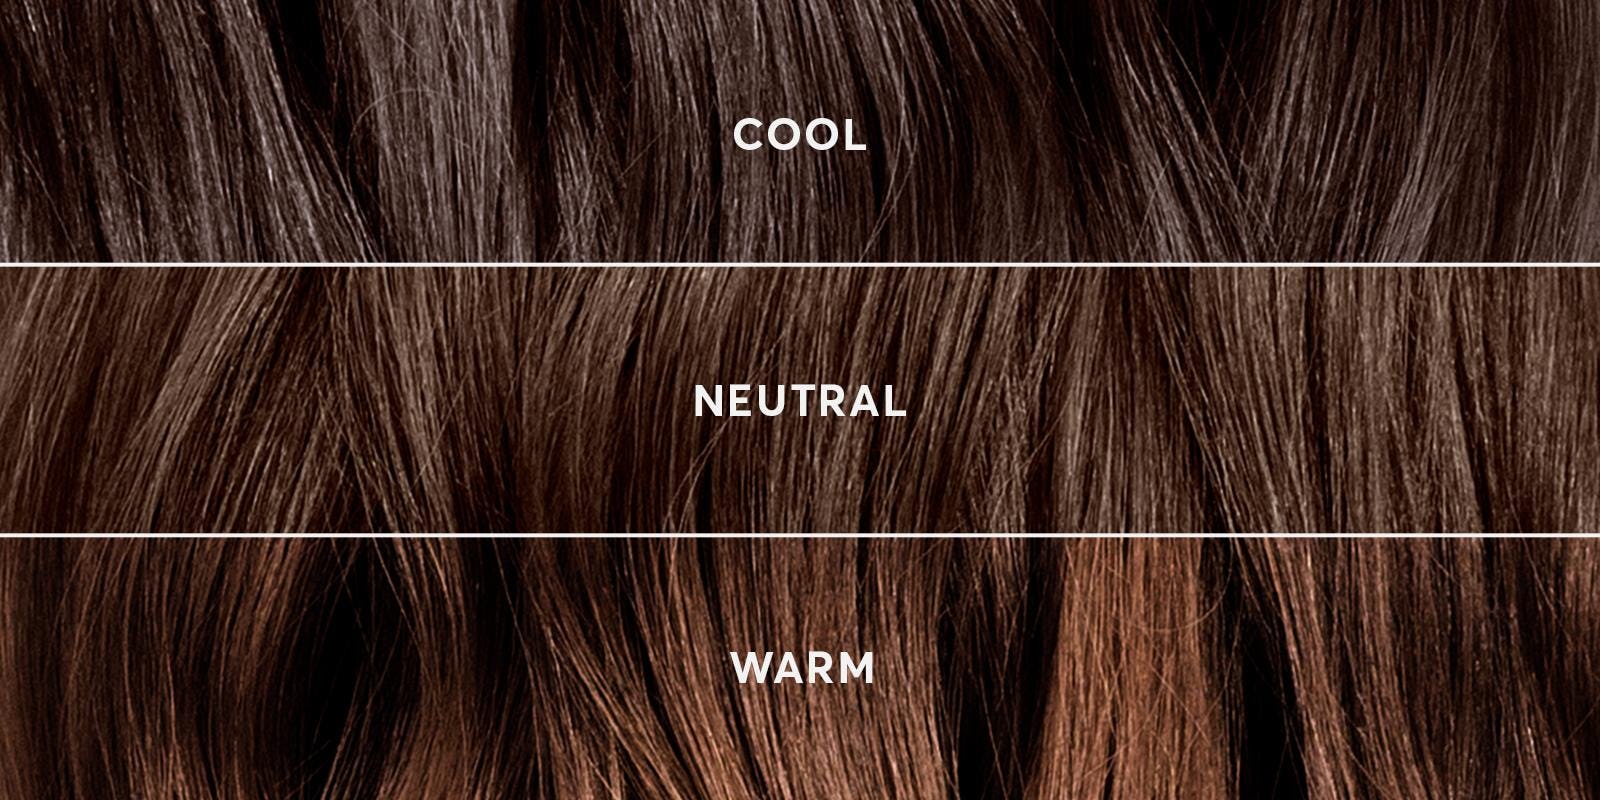 40 Trendiest Hair Colors for 2022 : Full Balayage with Soft Warm Tones